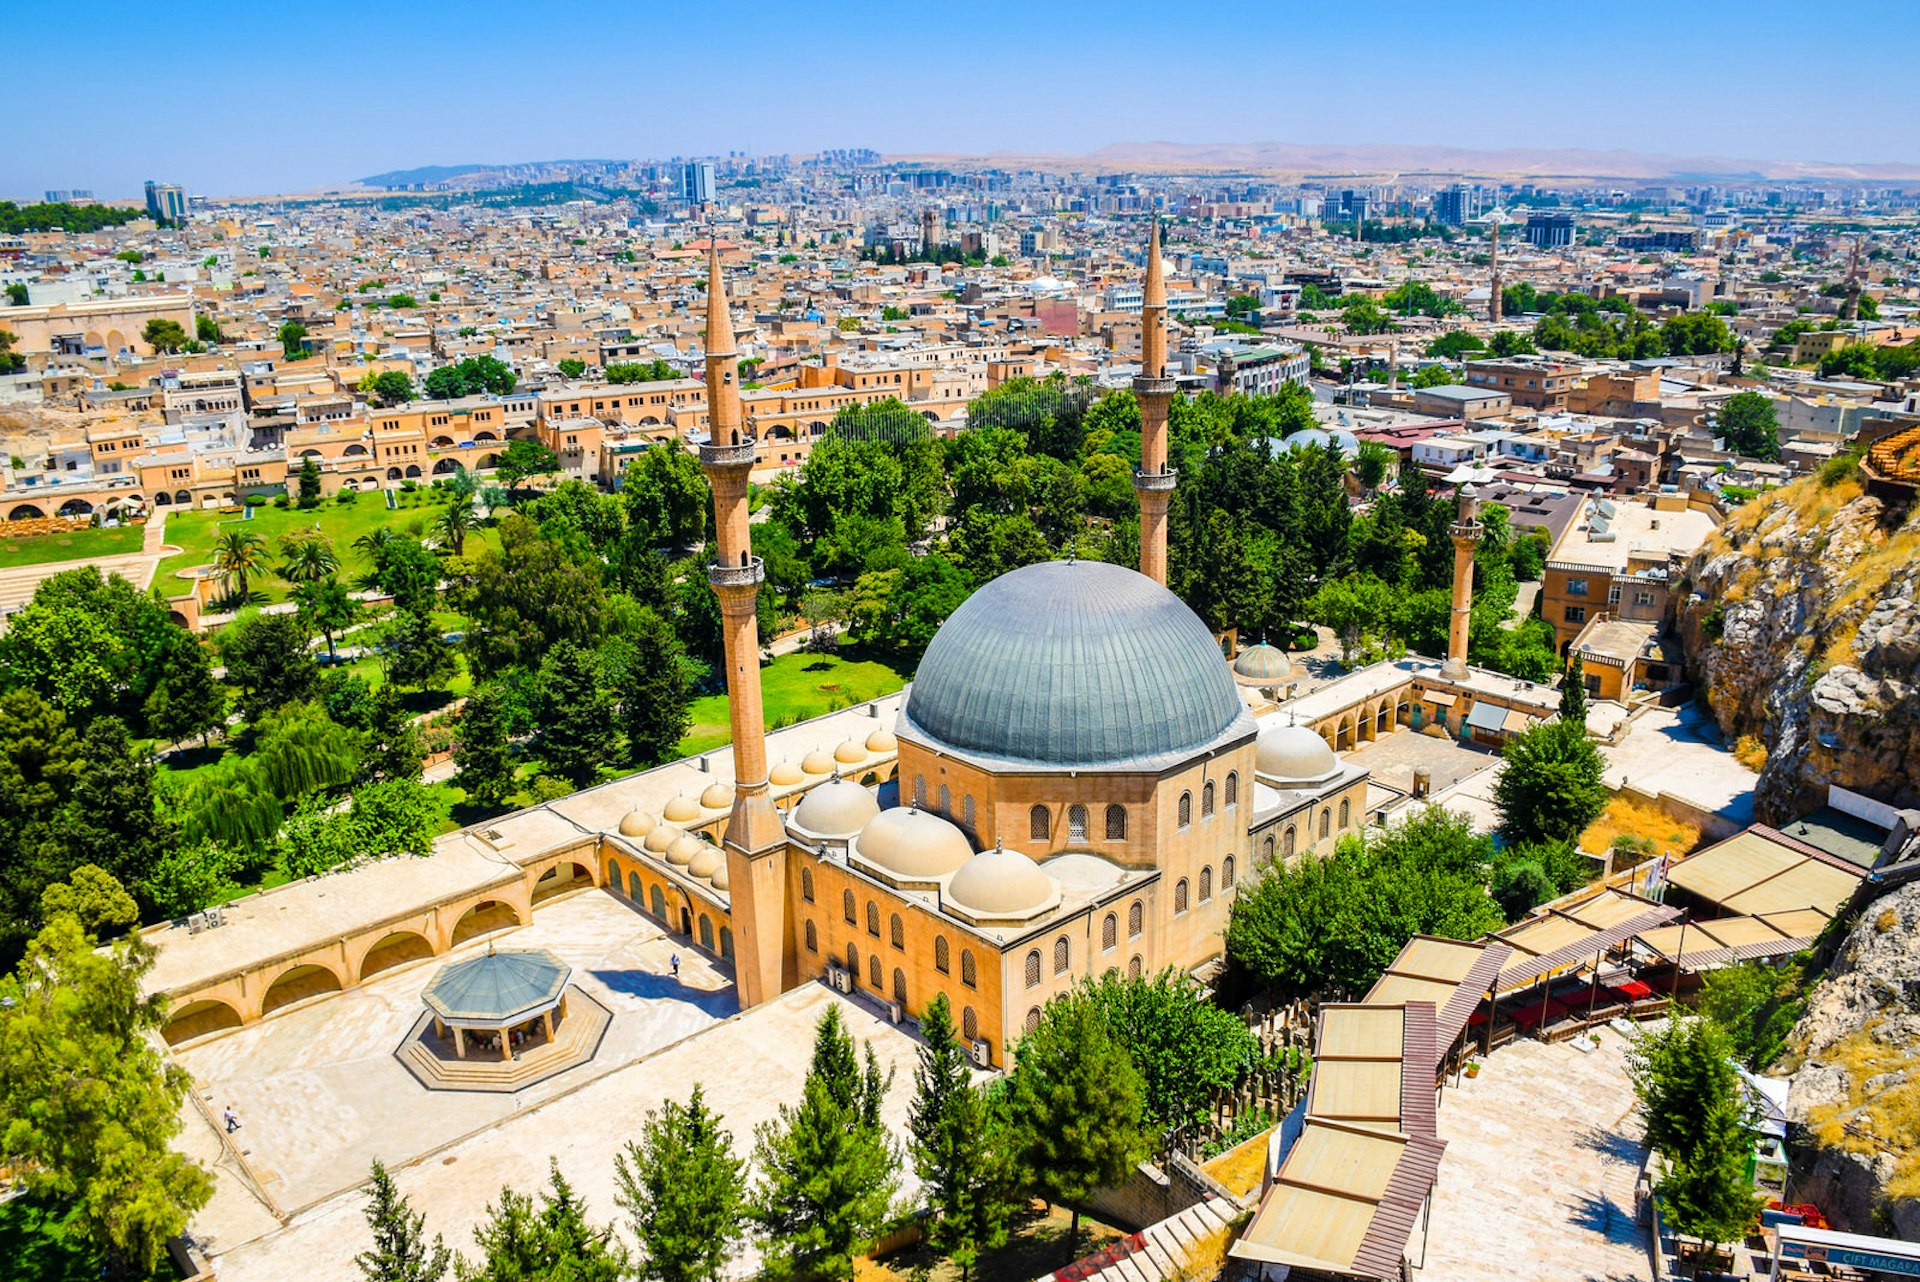 The skyline of Sanliurfa as viewed from the castle, Turkey. Image by Iam_Autumnshine / Shutterstock